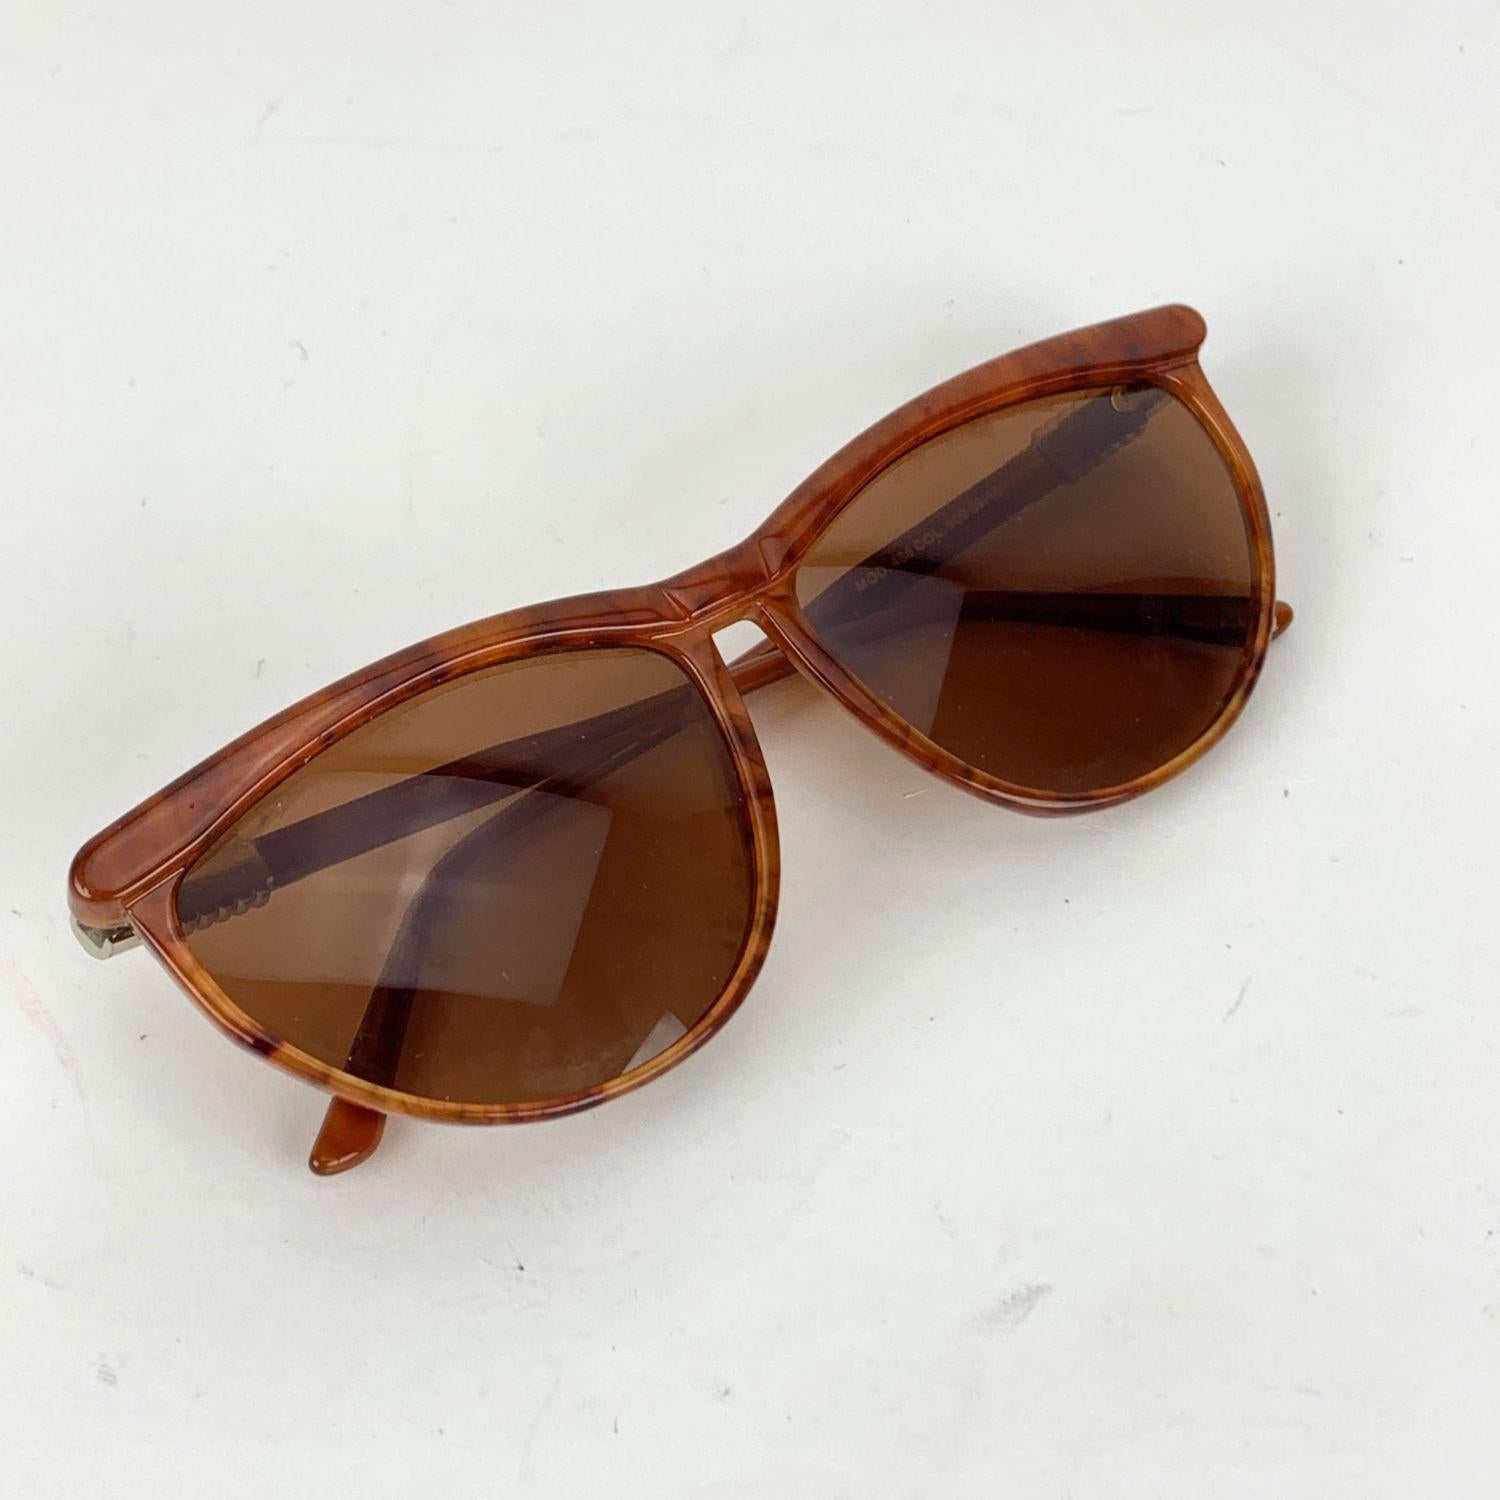 Brown vintage sunglasses Mod.488 - Col 909 by Gianni Versace. Iconic 90s sunglasses with silver metal detailing on temples. Original 100% Total UVA/UVB protection original lenses in brown color. Made in Italy

Details

MATERIAL: Acetate

COLOR: